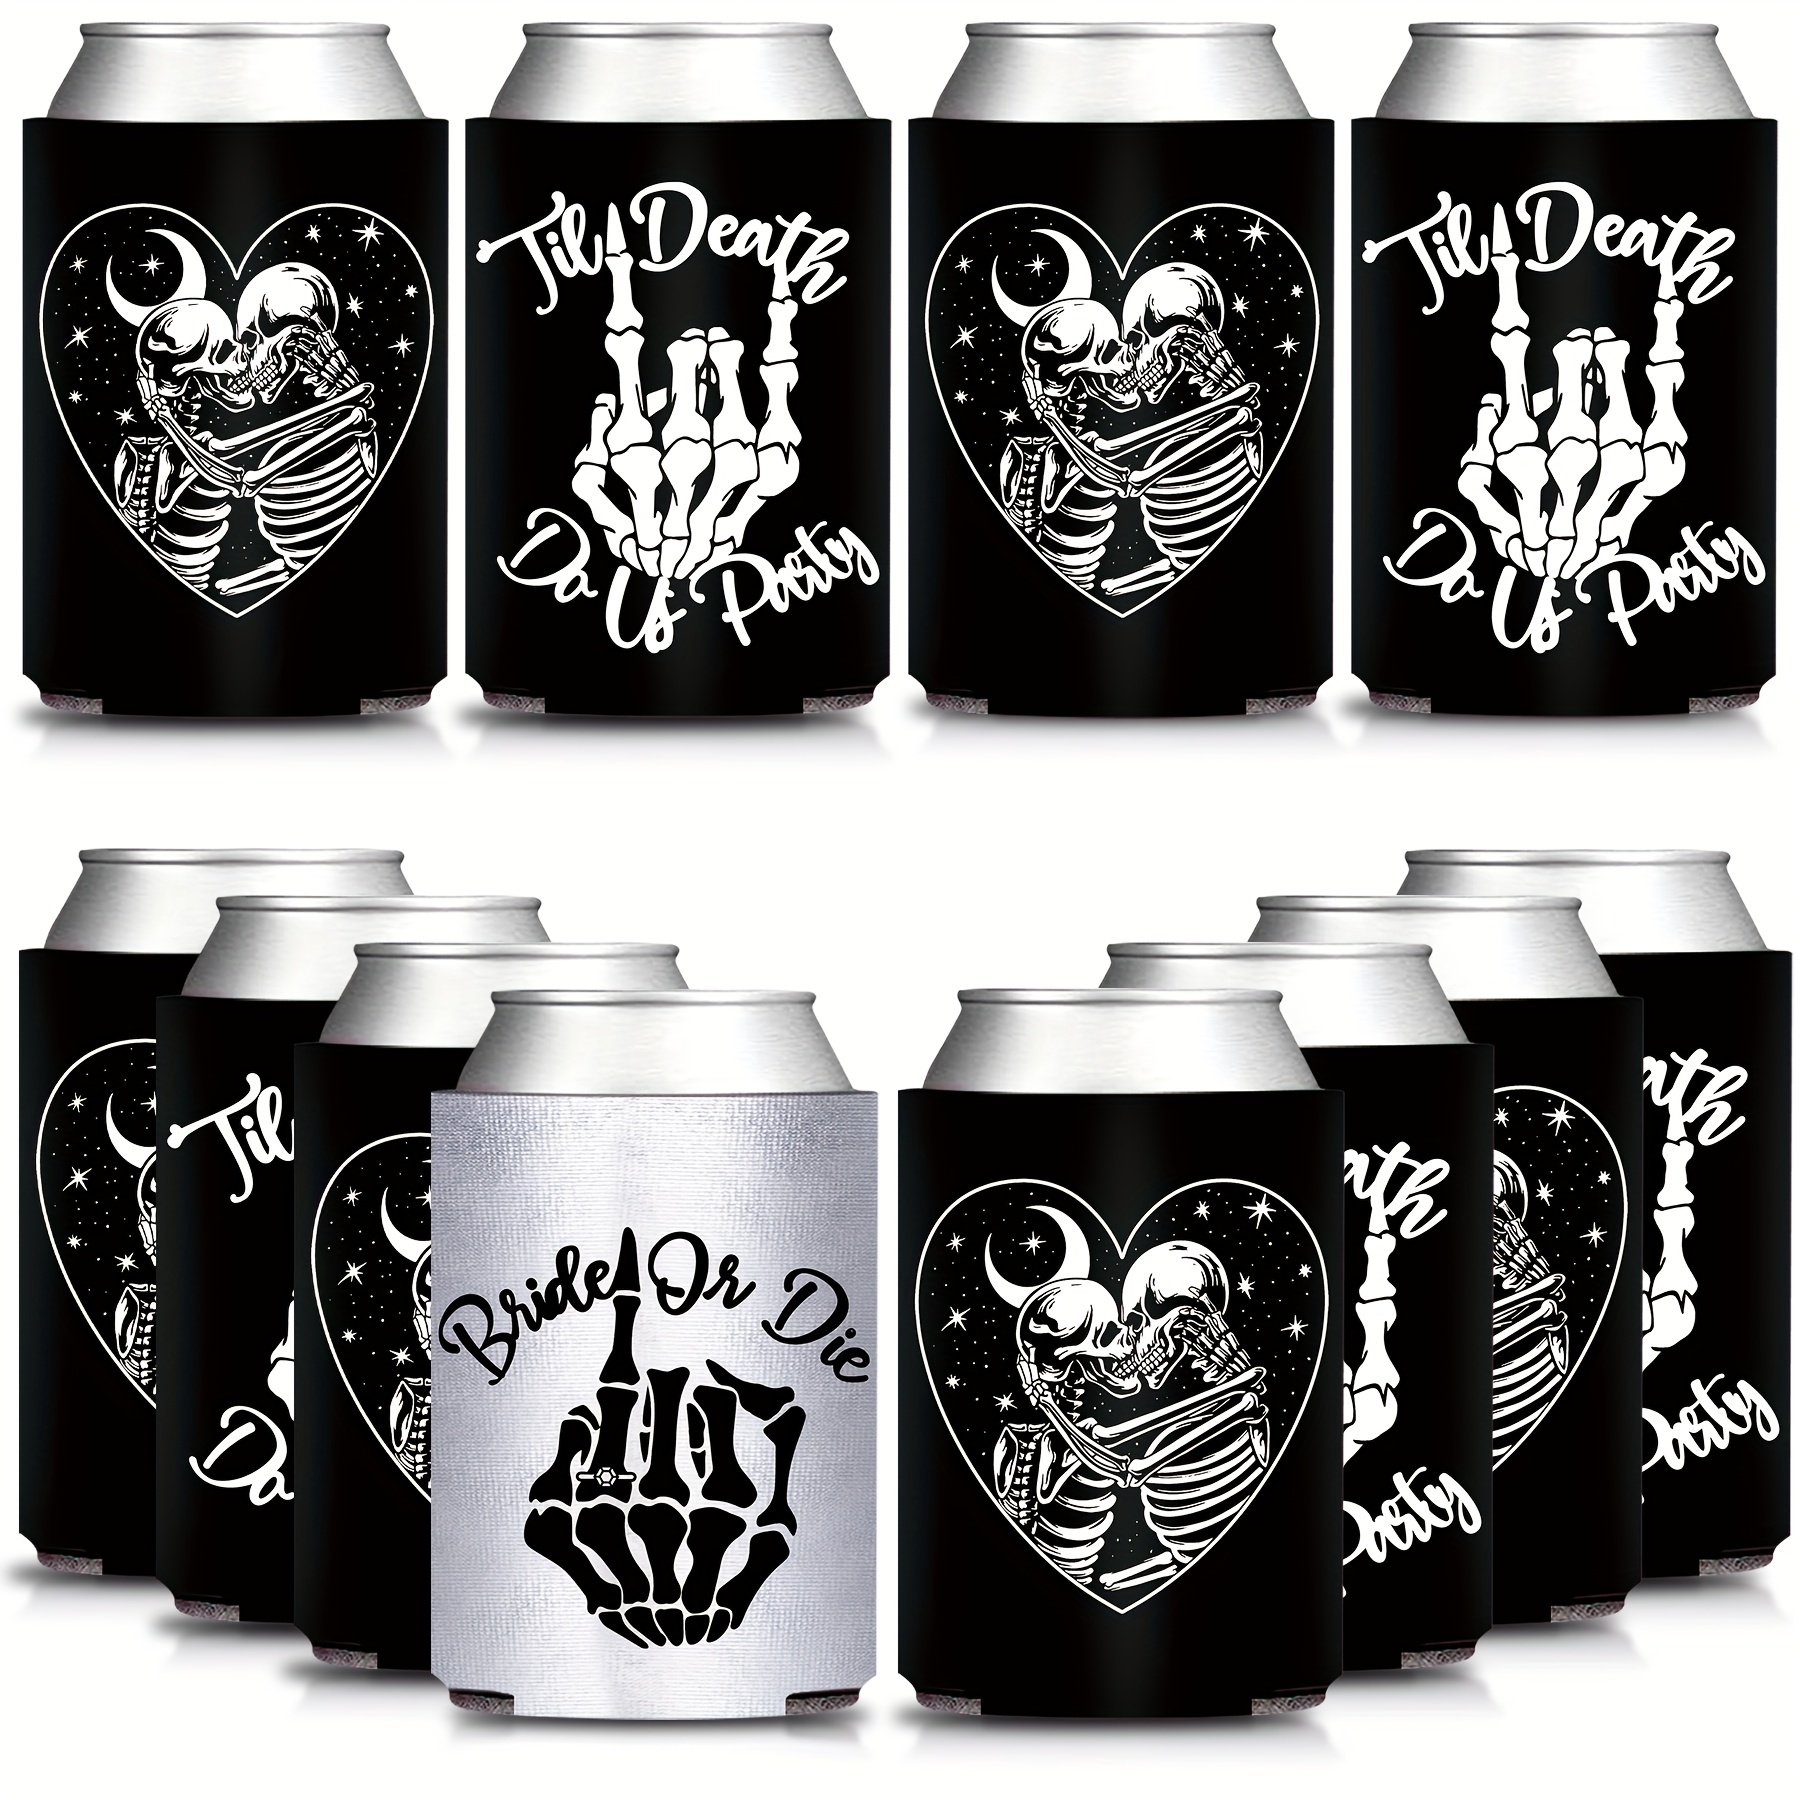 Sliner 12 Pcs Bride or Die Bachelorette Party Cups 16 oz Skull Till Death  Do Us Party Cup Halloween …See more Sliner 12 Pcs Bride or Die Bachelorette